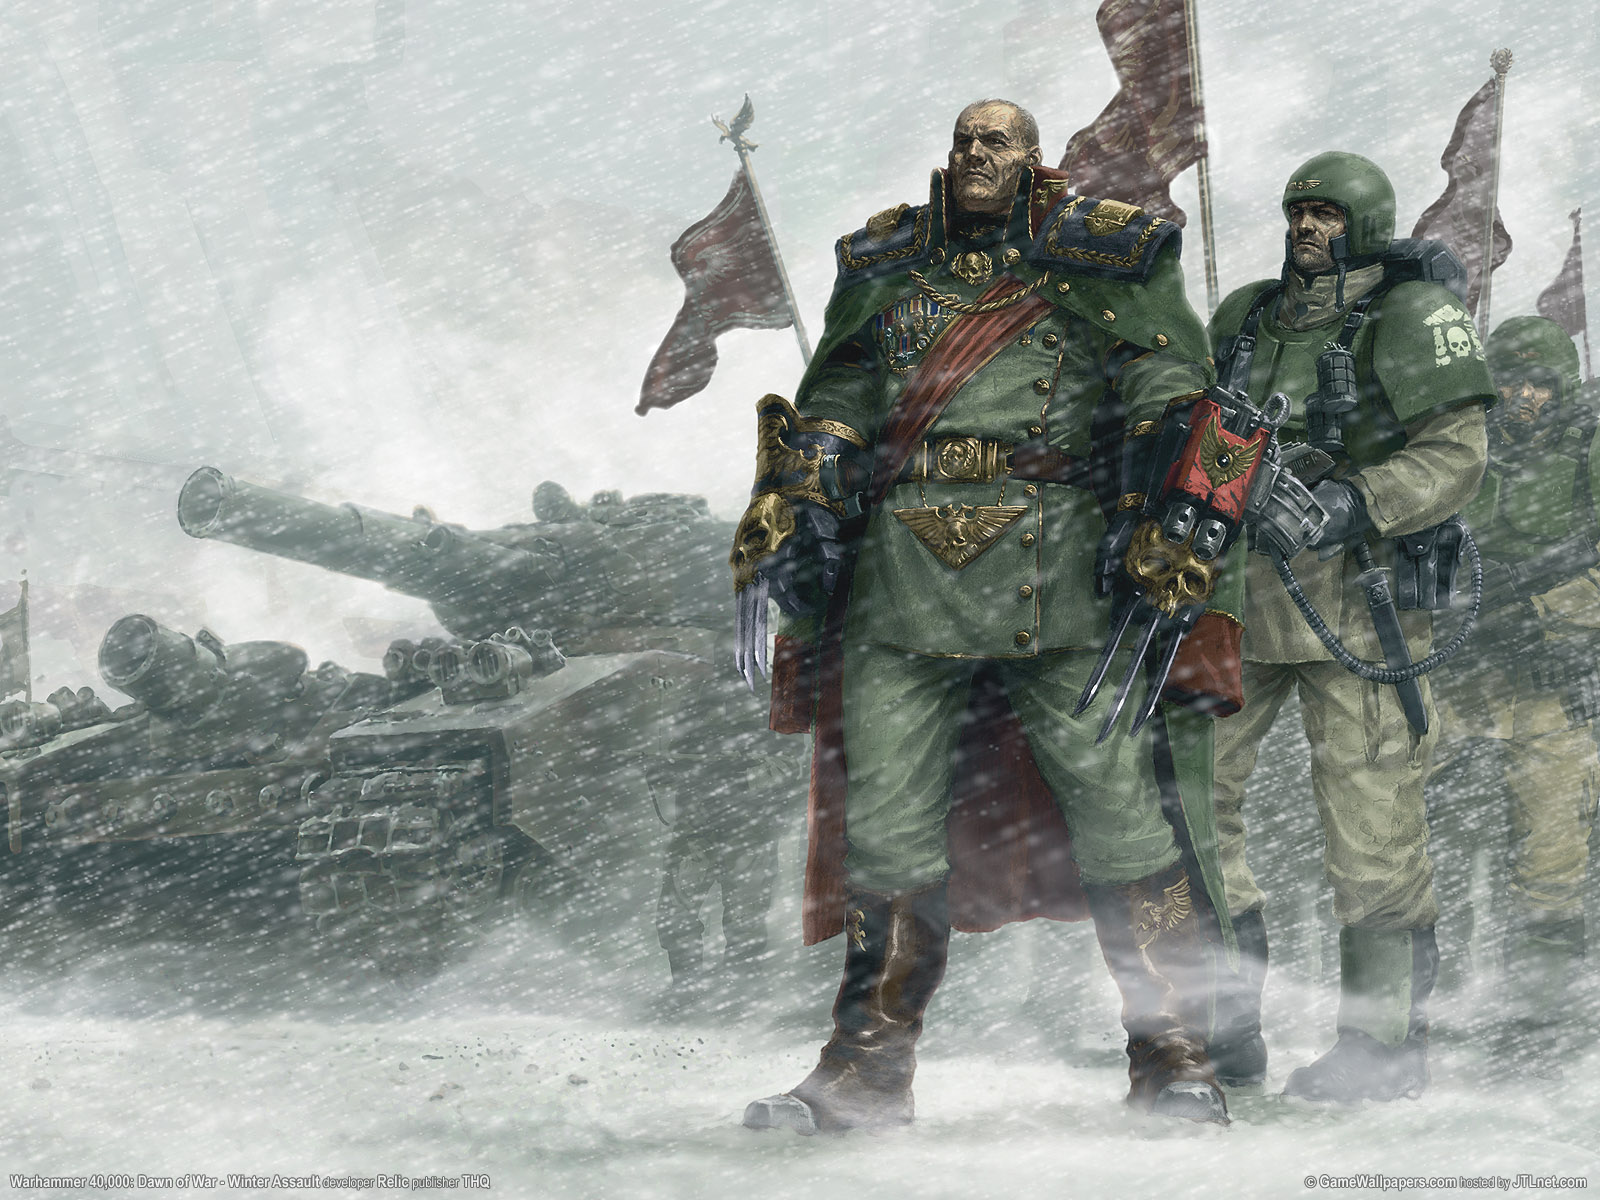 imperial guard wallpaper,action adventure game,illustration,soldier,conquistador,strategy video game